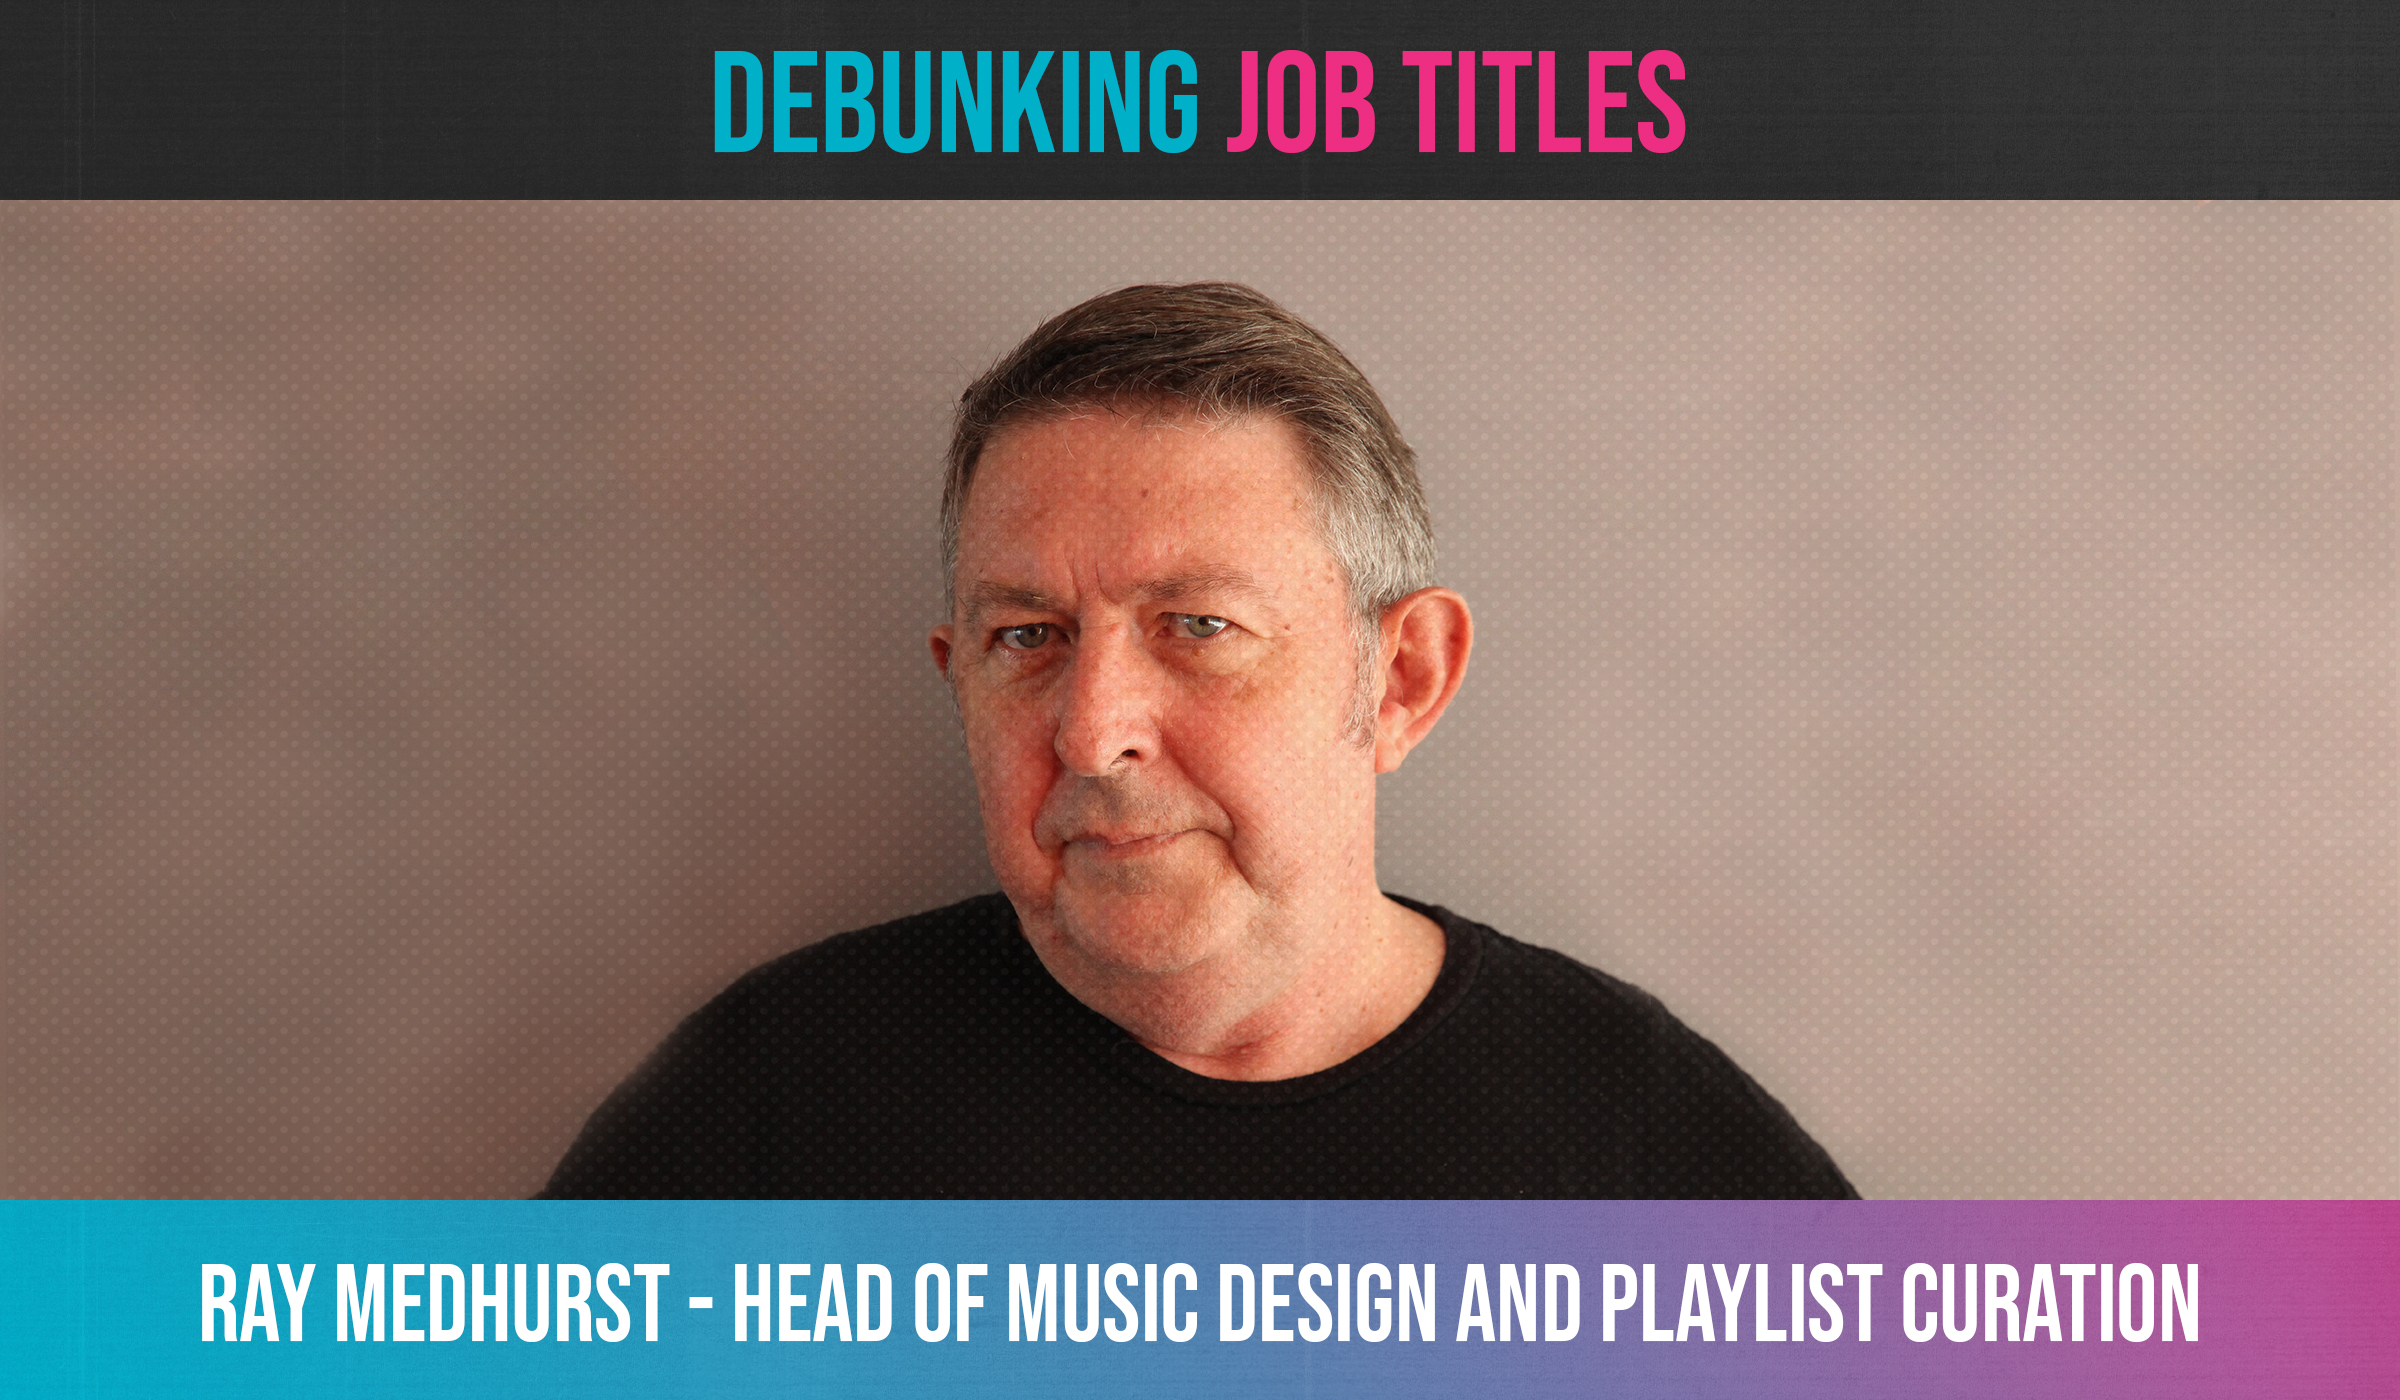 Debunking Job Titles: Head of music design and playlist curation